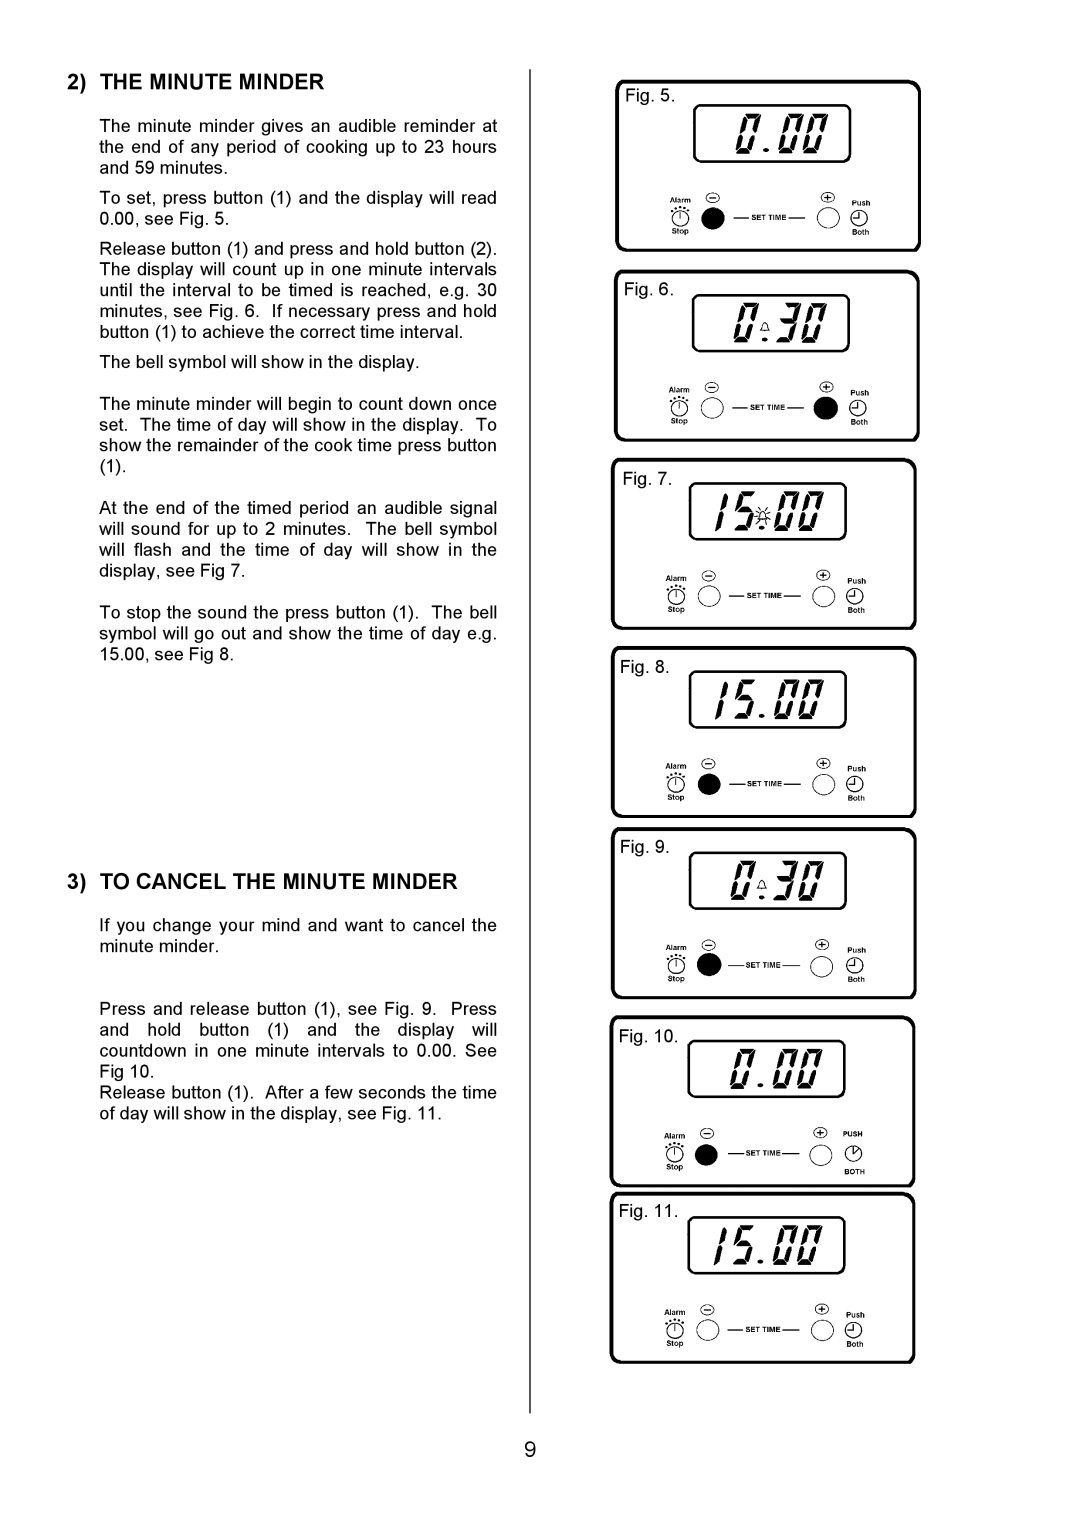 Electrolux SM 554 installation instructions To Cancel the Minute Minder 